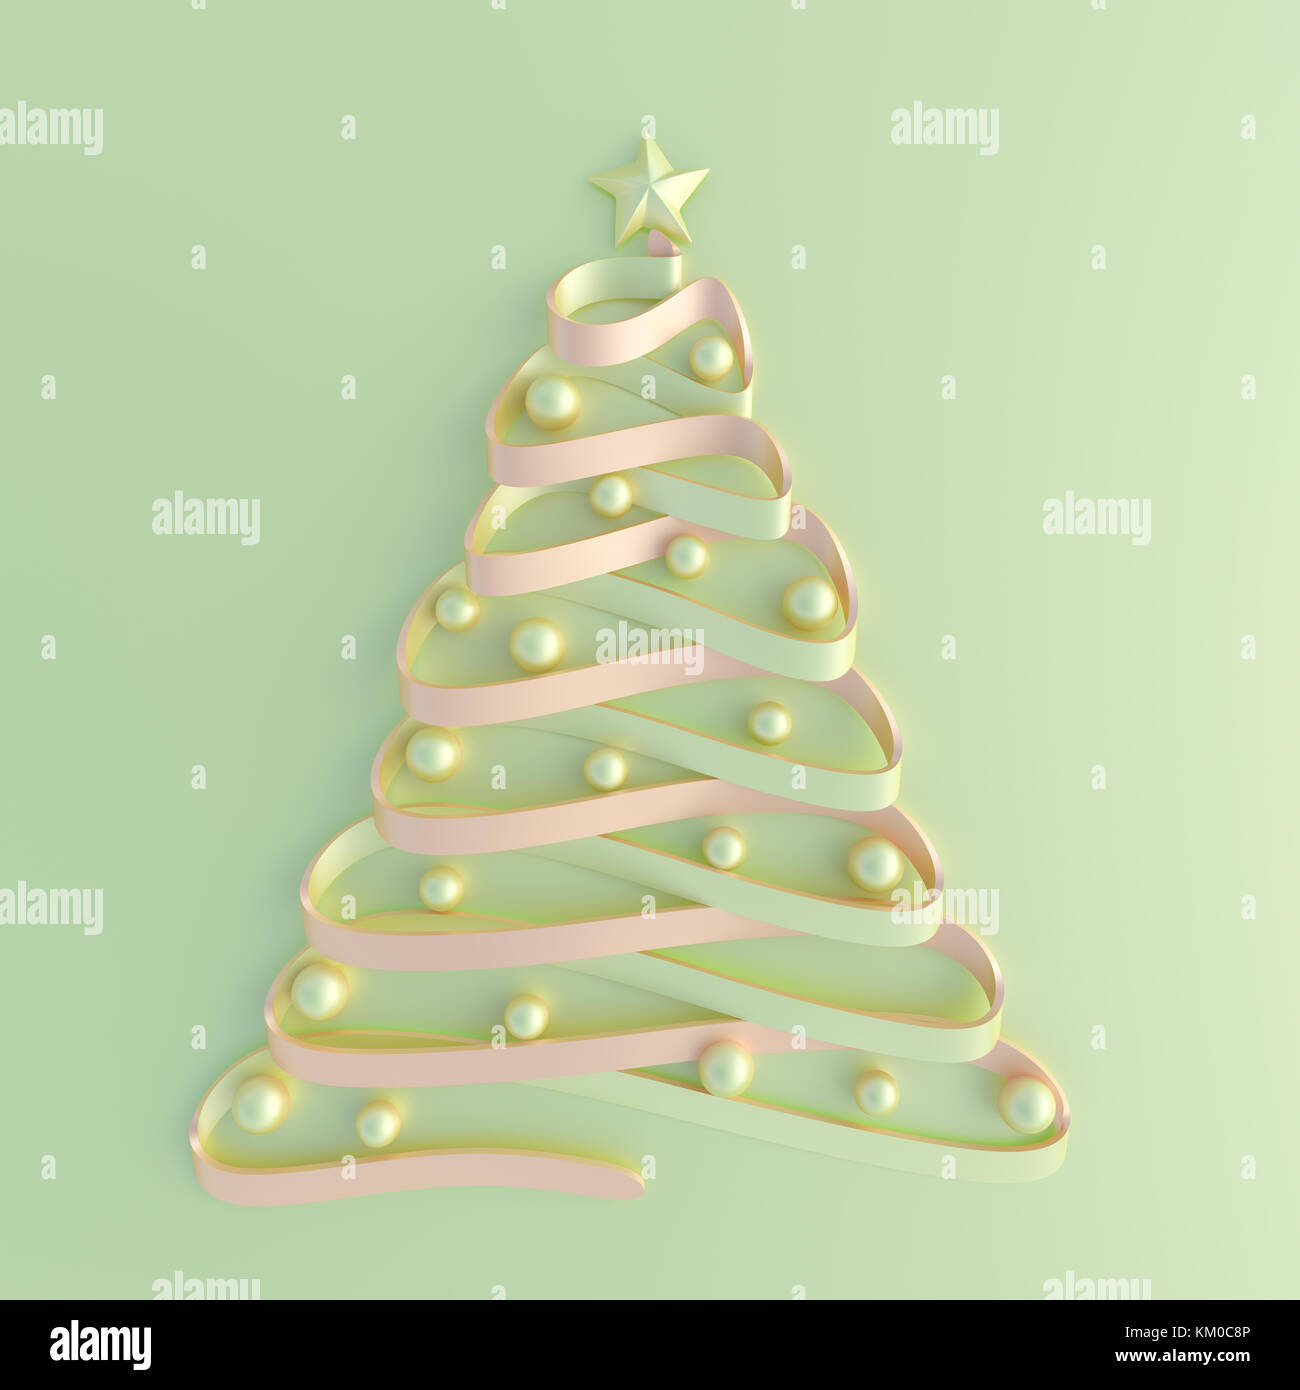 3D illustration. Concept image of a Christmas tree shaped ribbon in pastel colors. Stock Photo